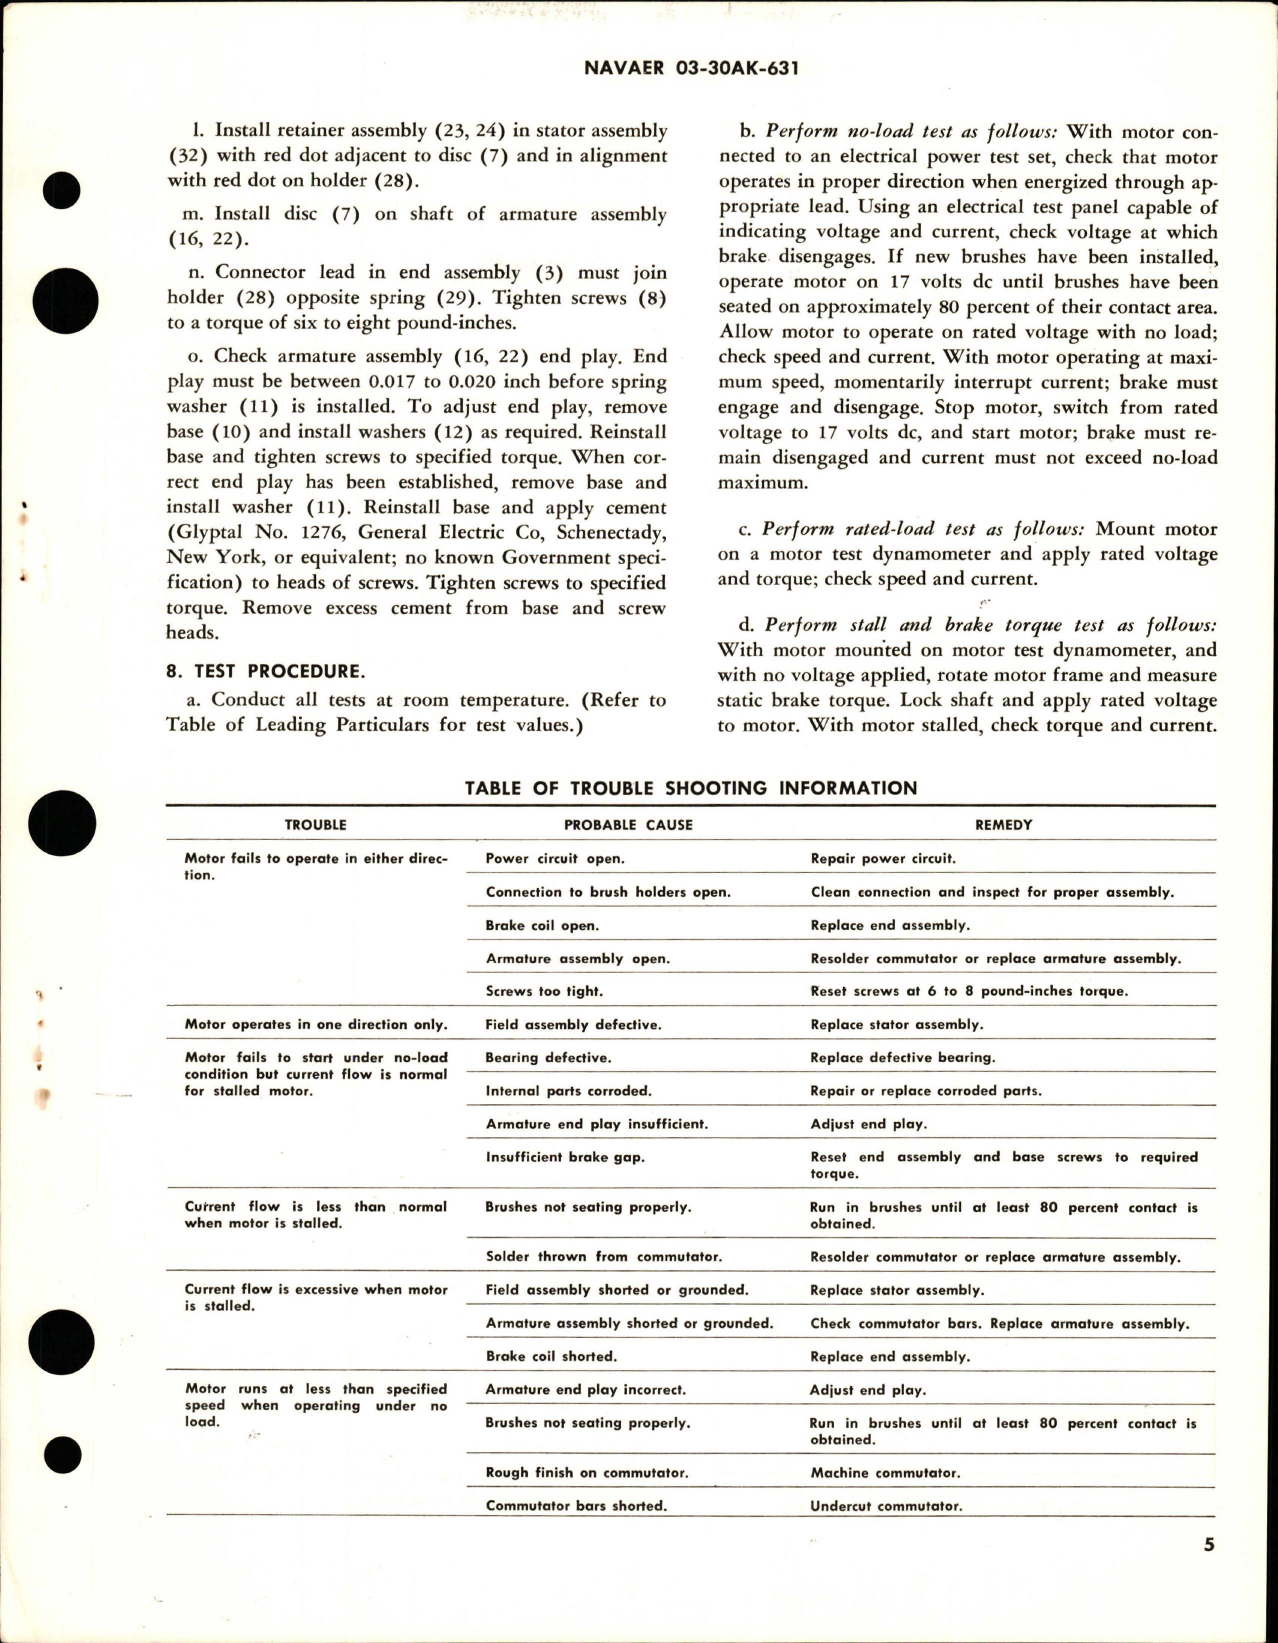 Sample page 5 from AirCorps Library document: Overhaul Instructions with Parts Breakdown for Direct-Current Motor - Part 36880 - Model DCM11-30-1 and DCM11-30-2 